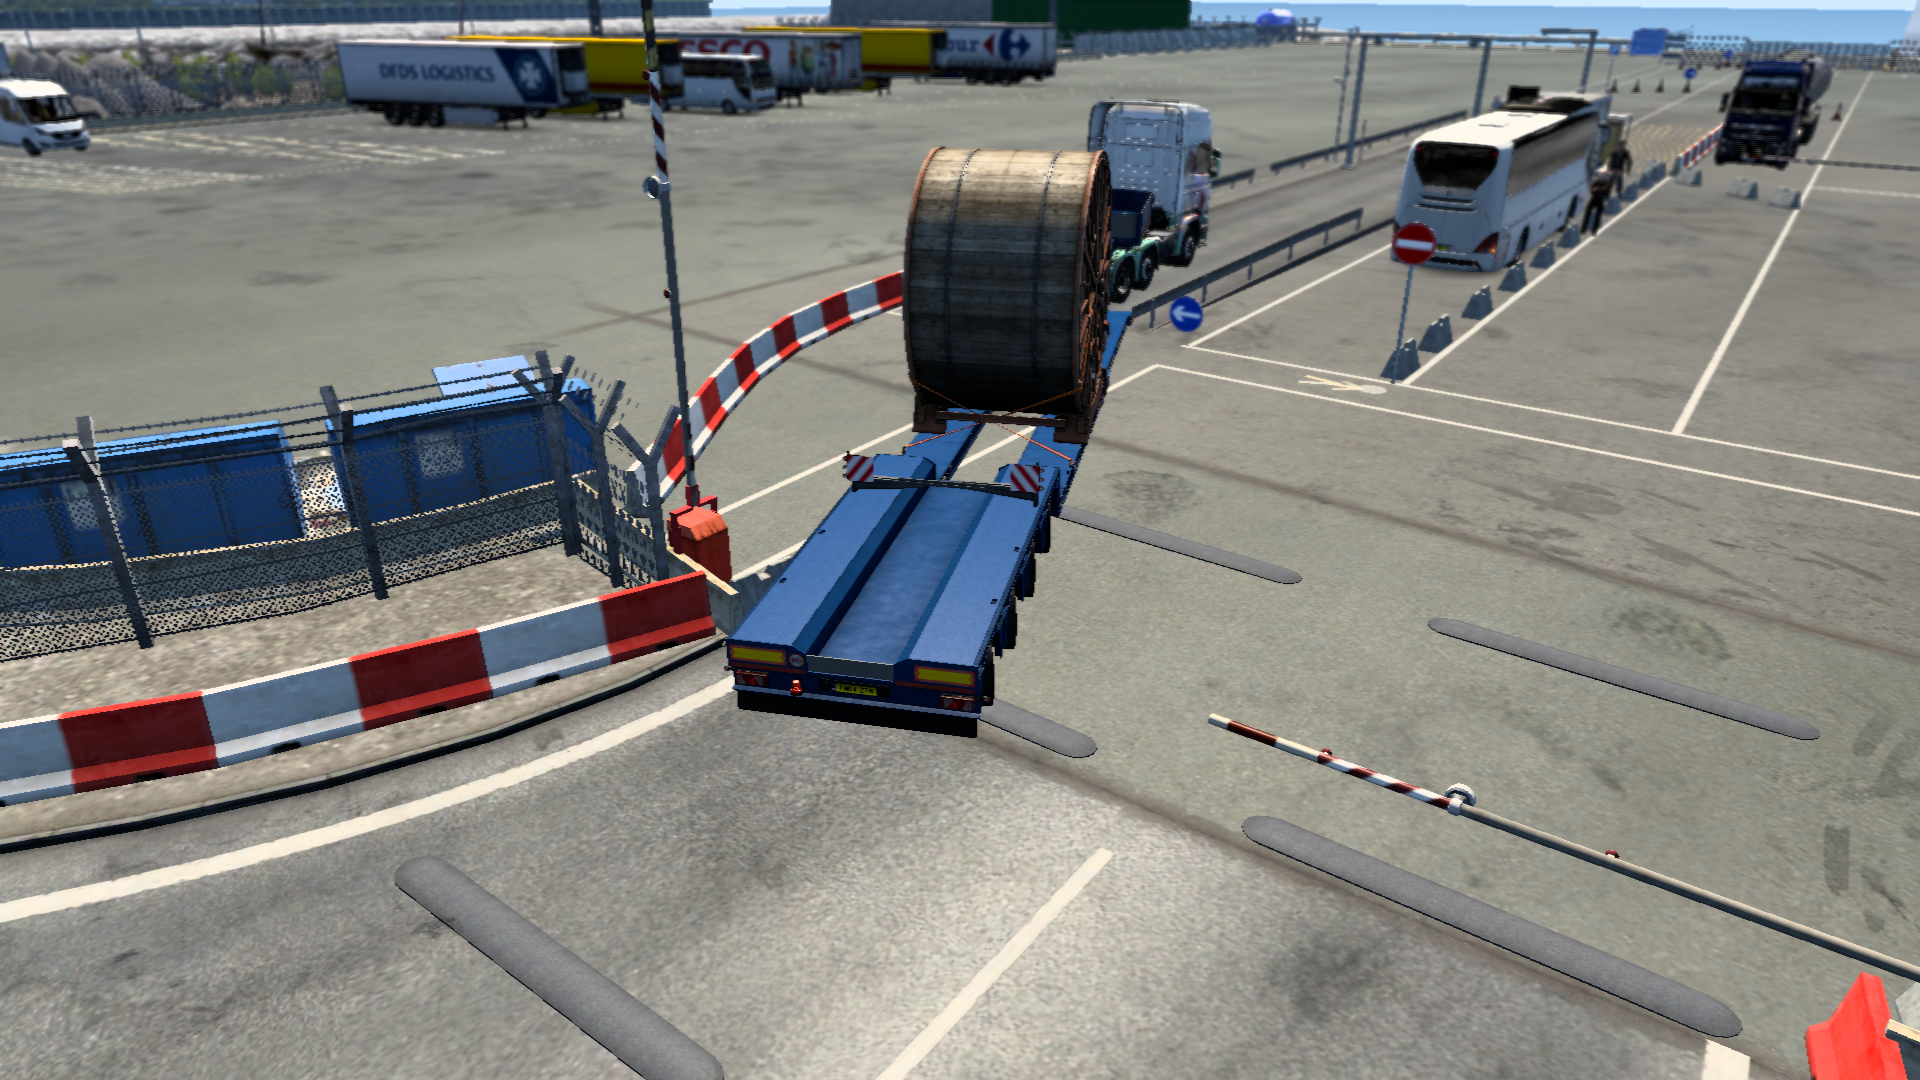 ets2_20211102_232422_00.png